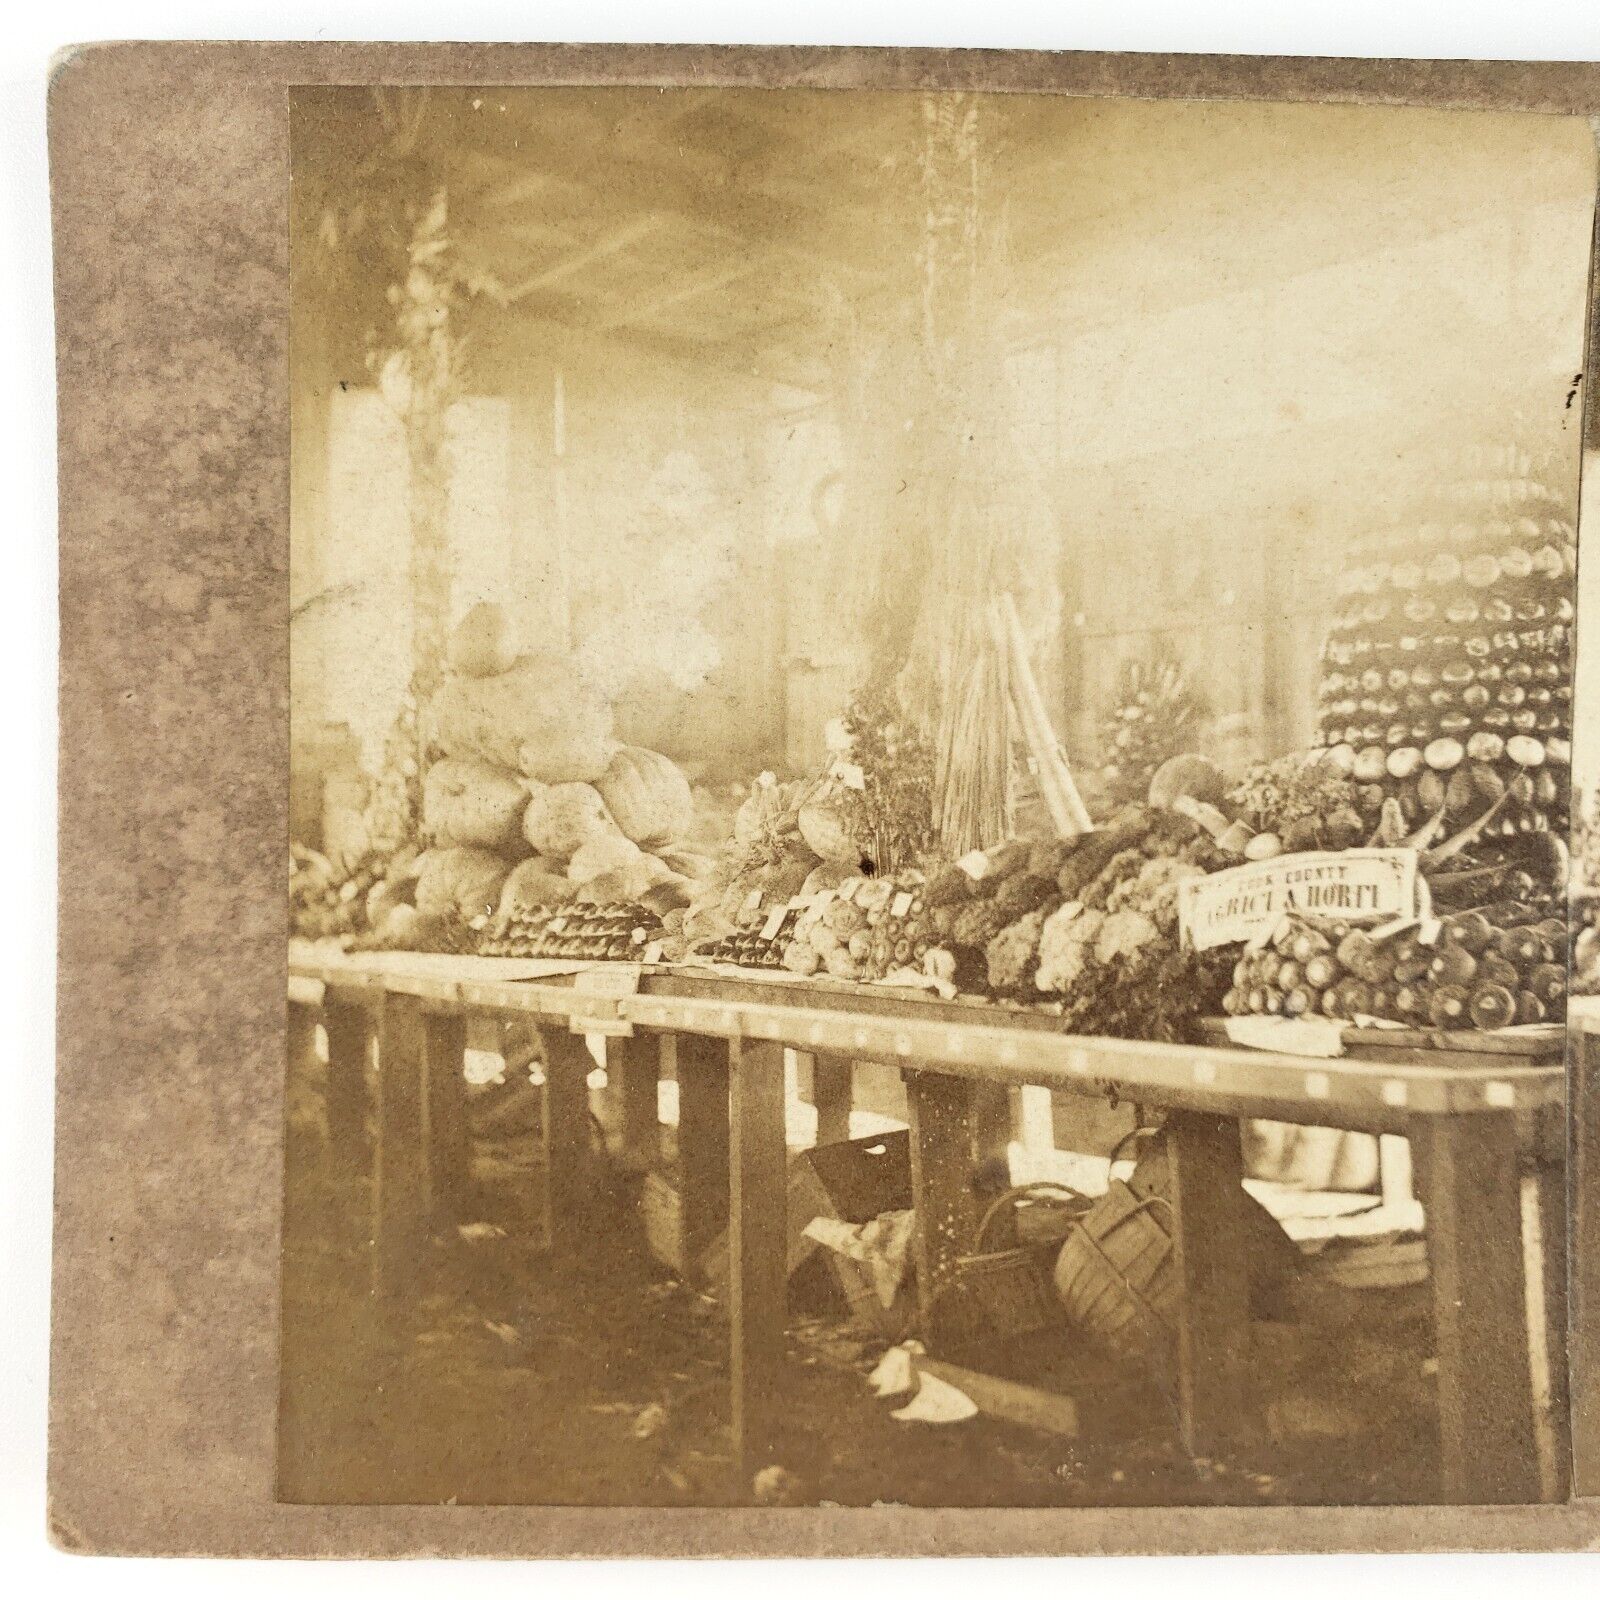 Cook County Produce Market Stereoview c1880 Vegetable Fruit Stand Photo H1652